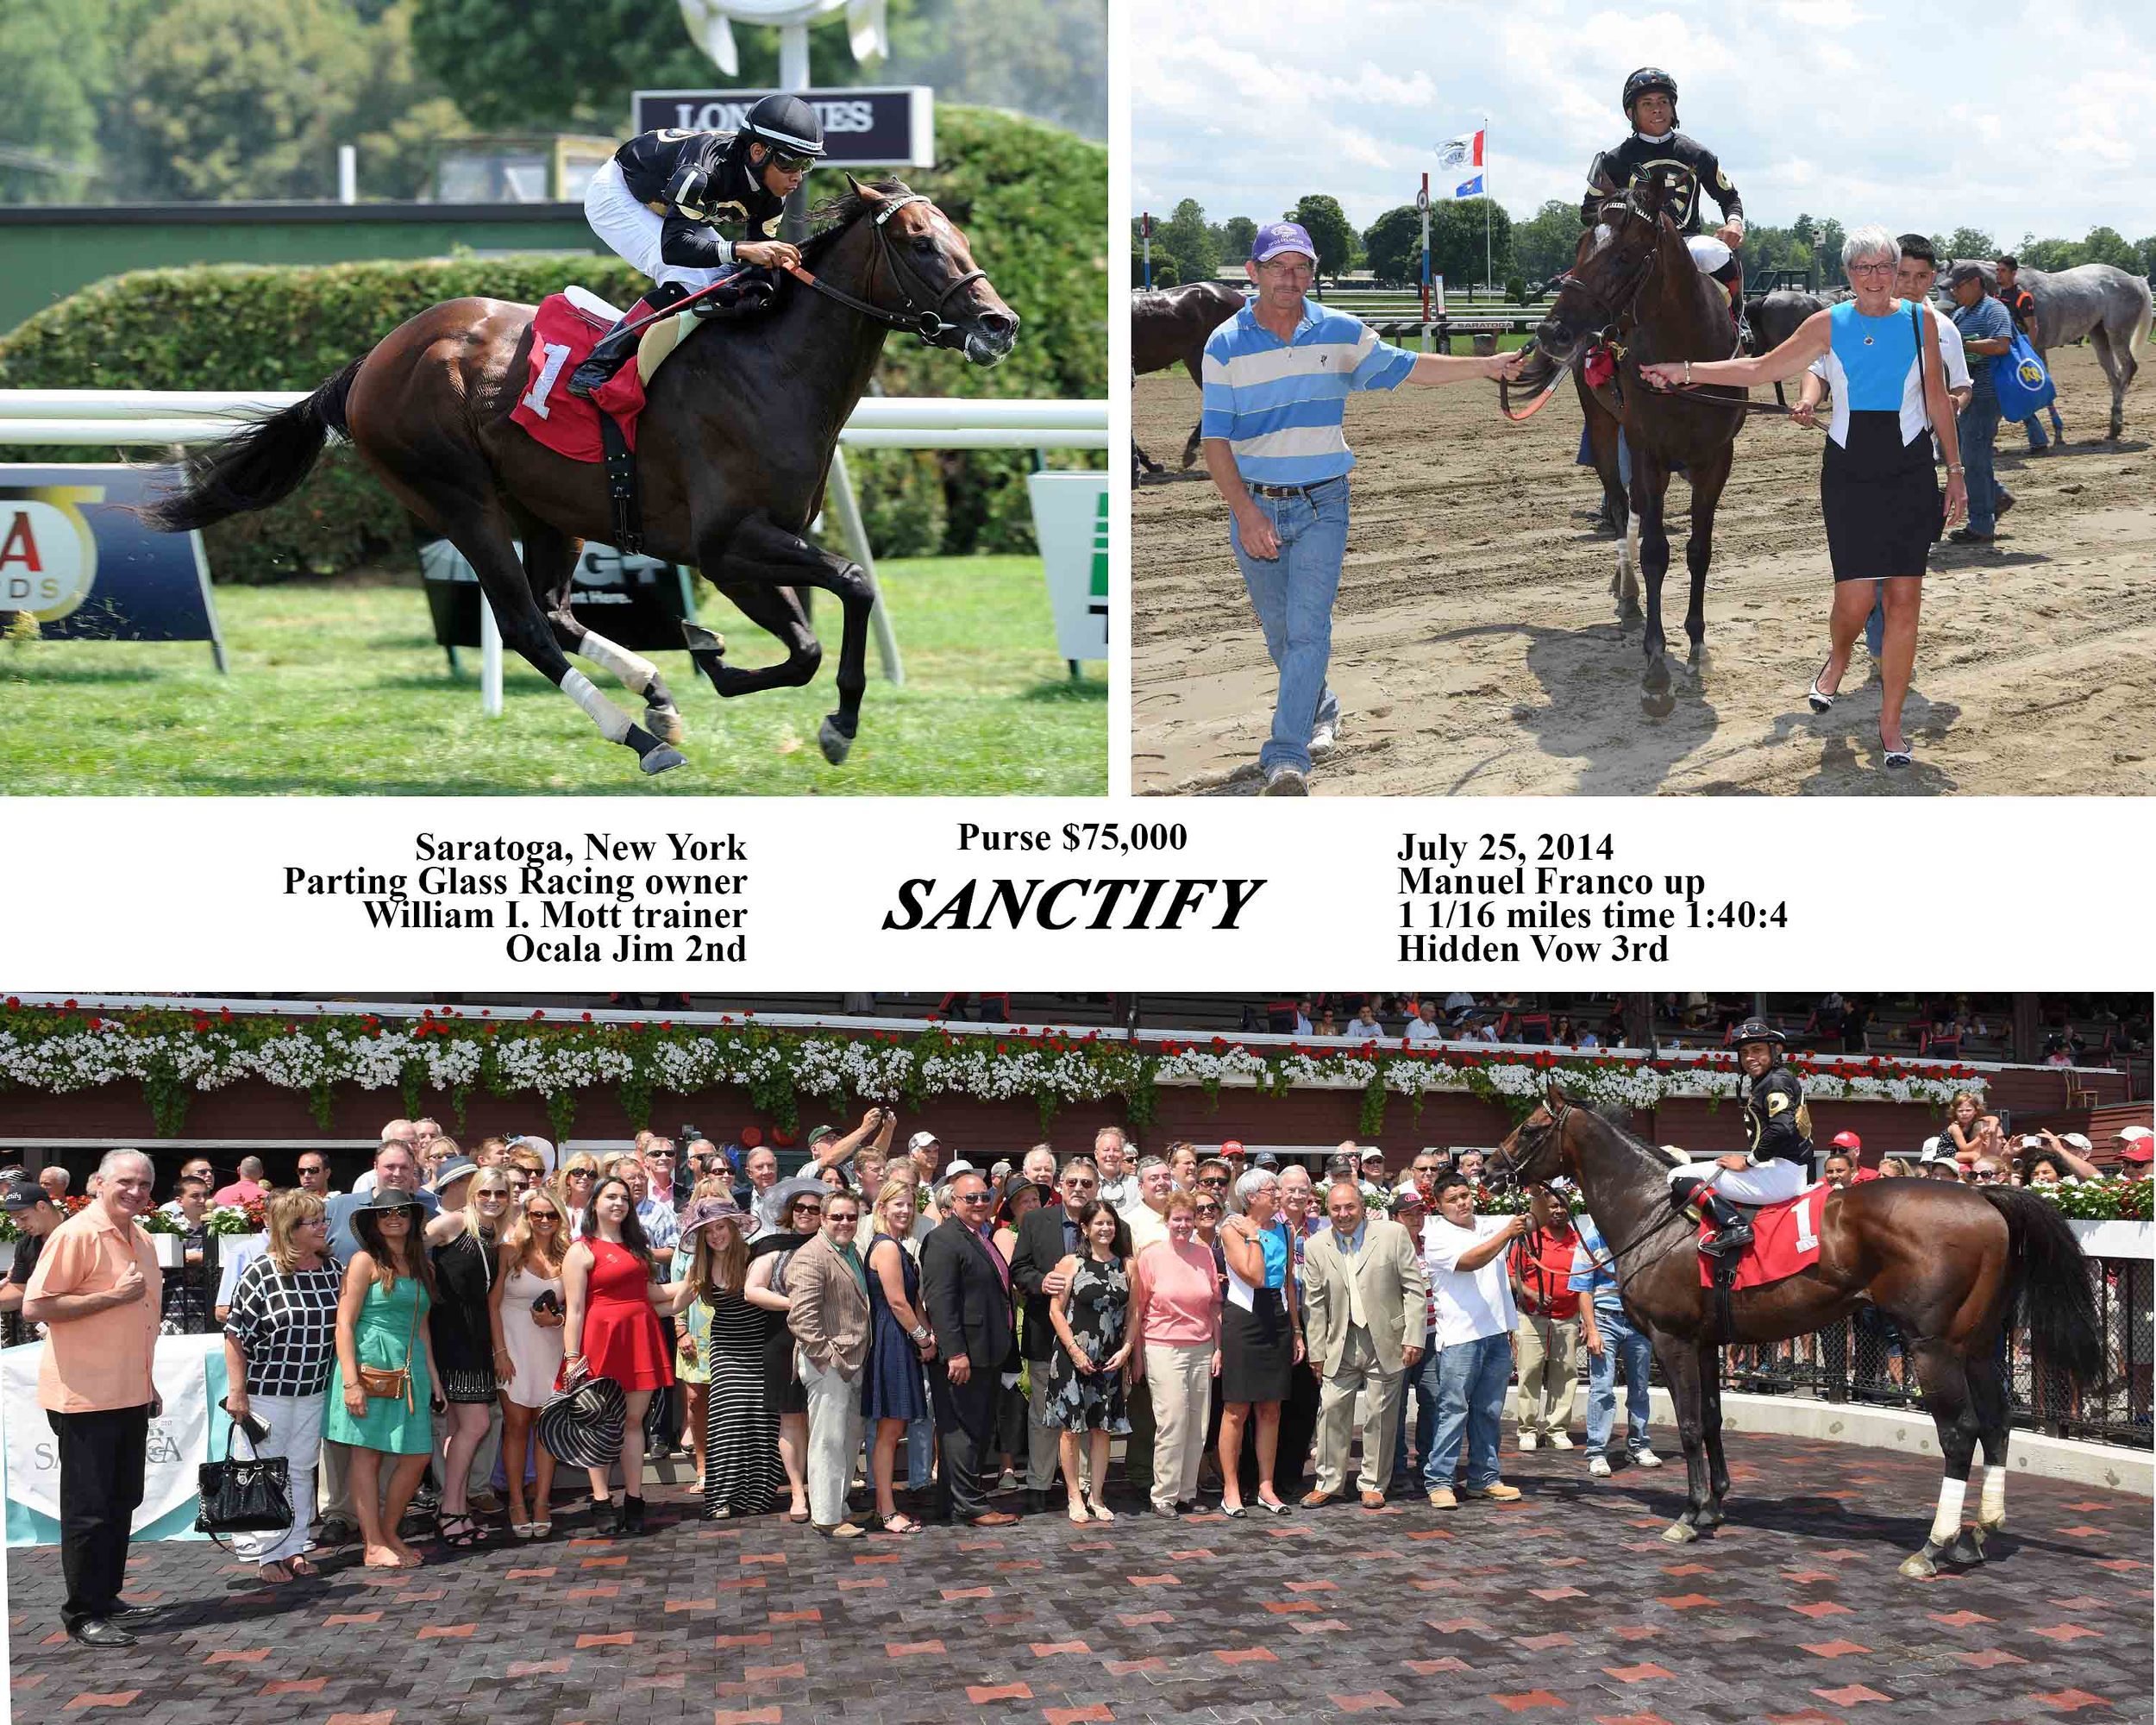 Sanctify WIN picture - 7.26.14 - The Spa.jpg